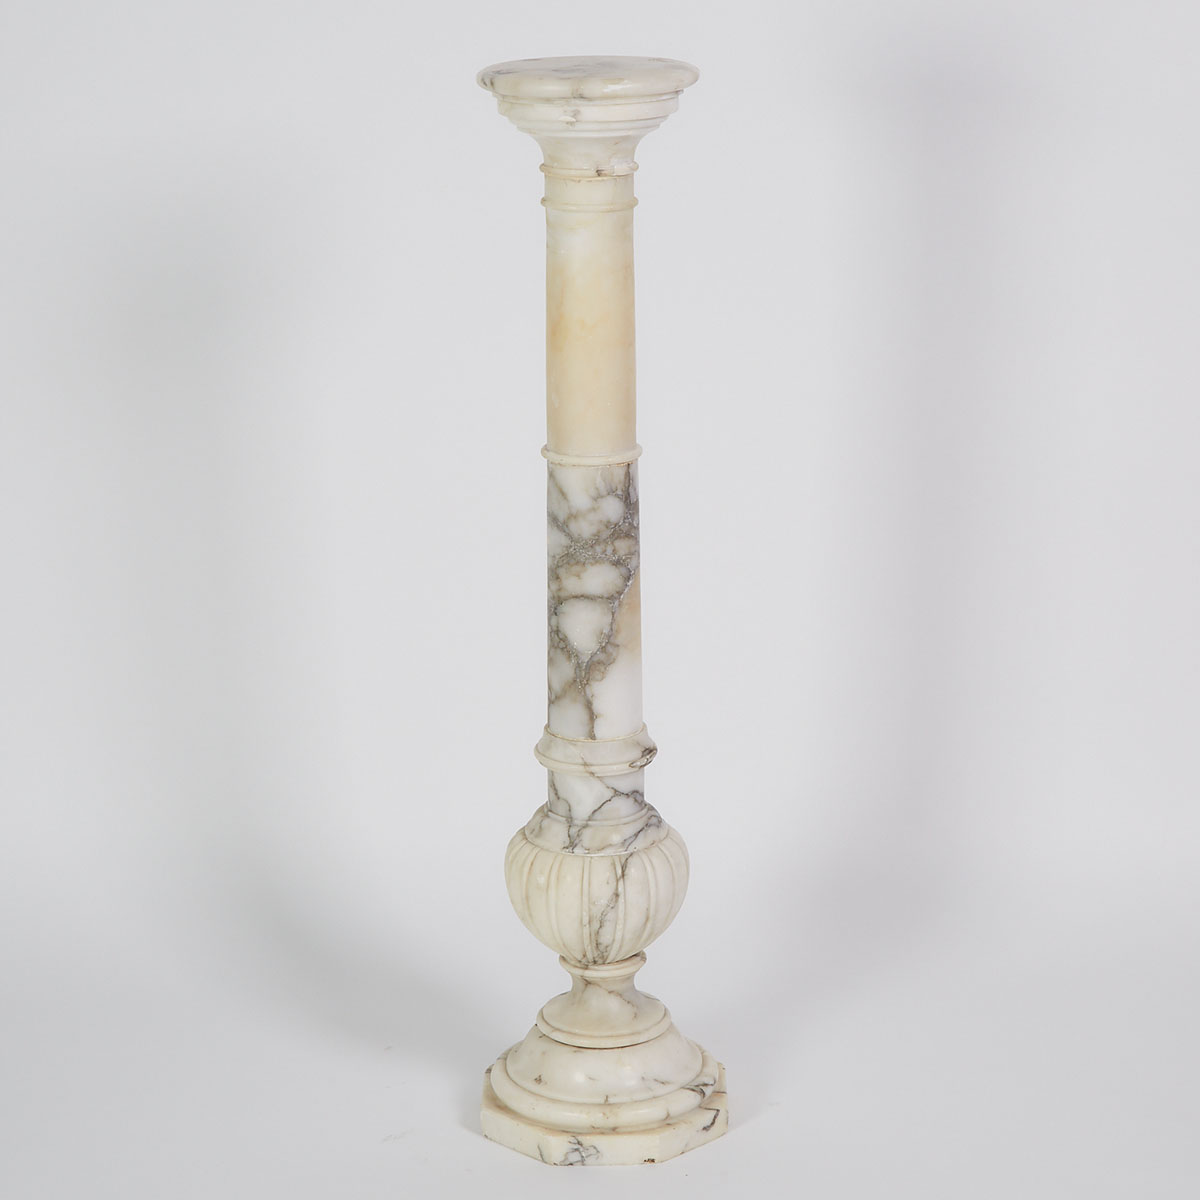 Italian Turned Alabaster Column Form Pedestal, 19th/early 20th century